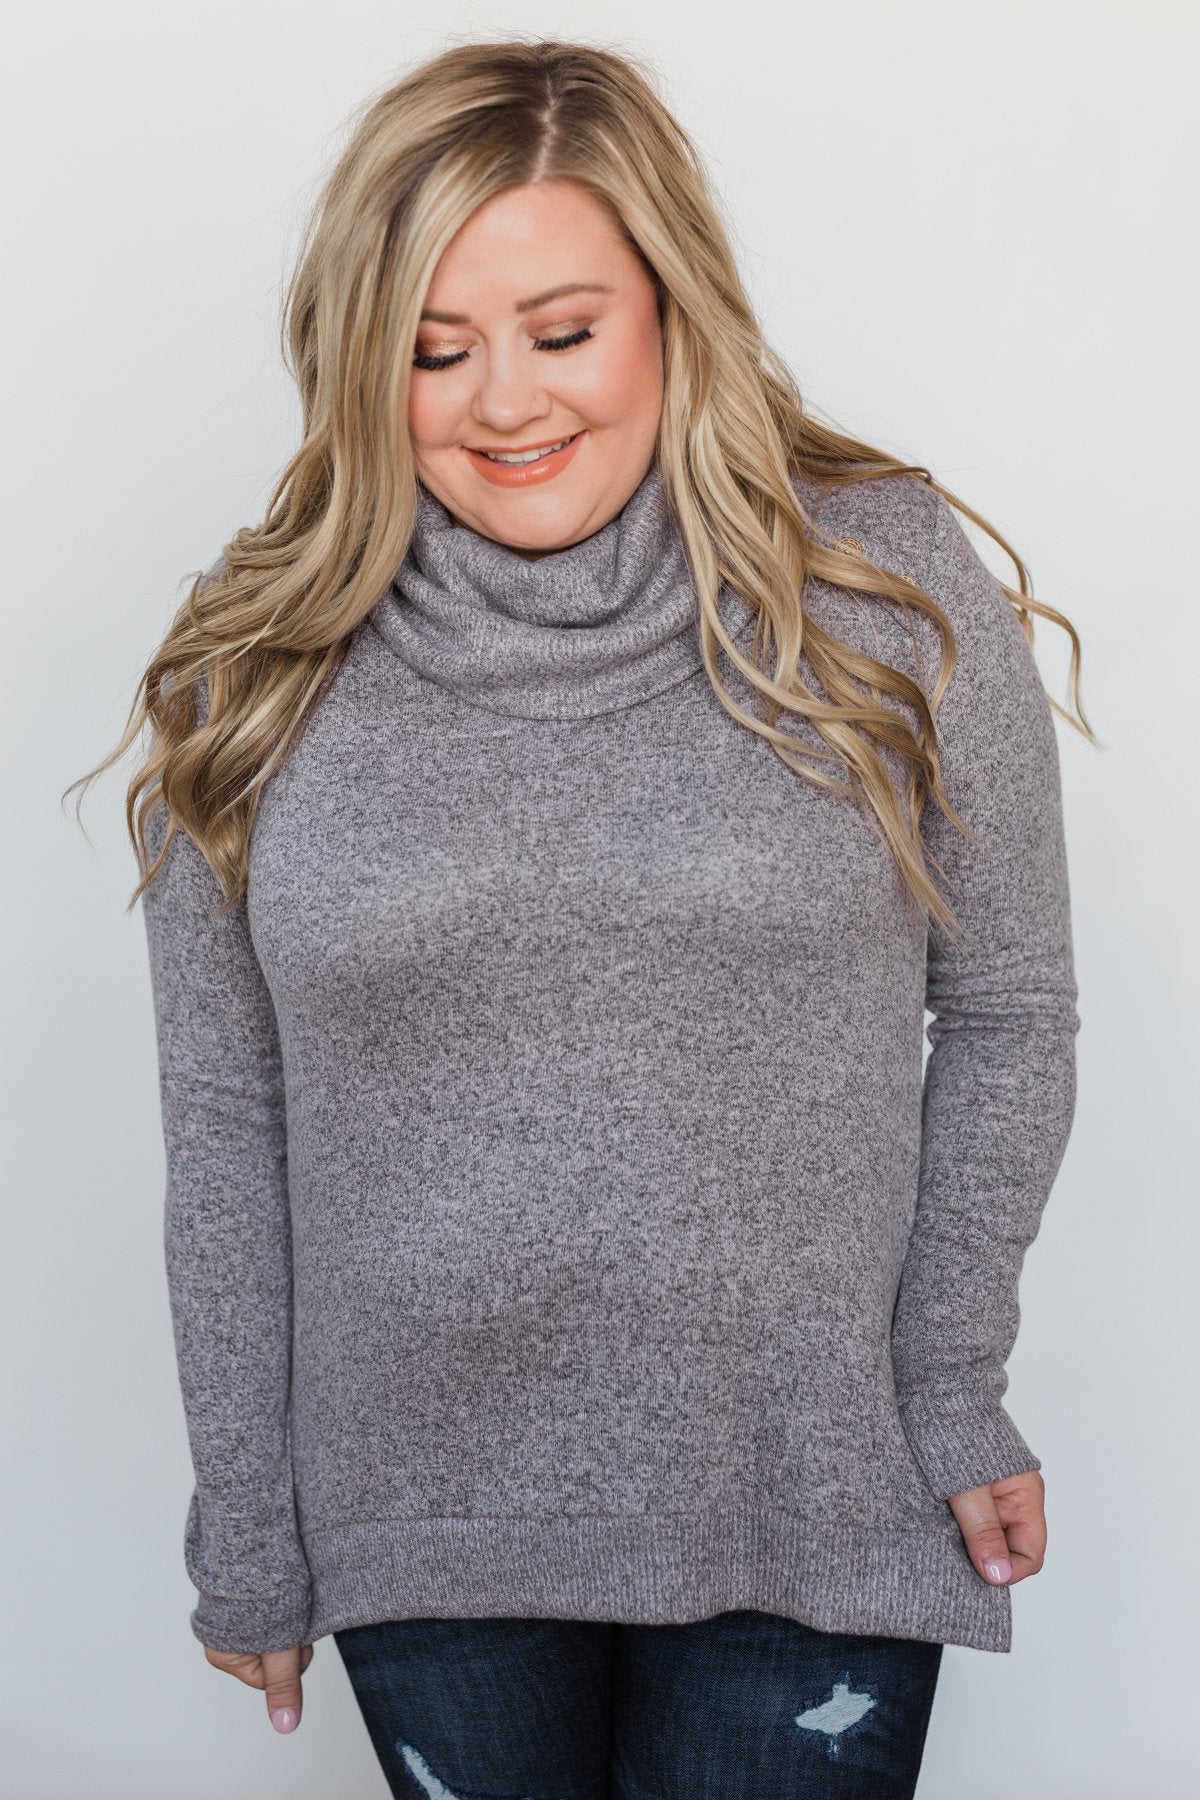 Hooked on a Feeling Cowl Neck Top - Lavender